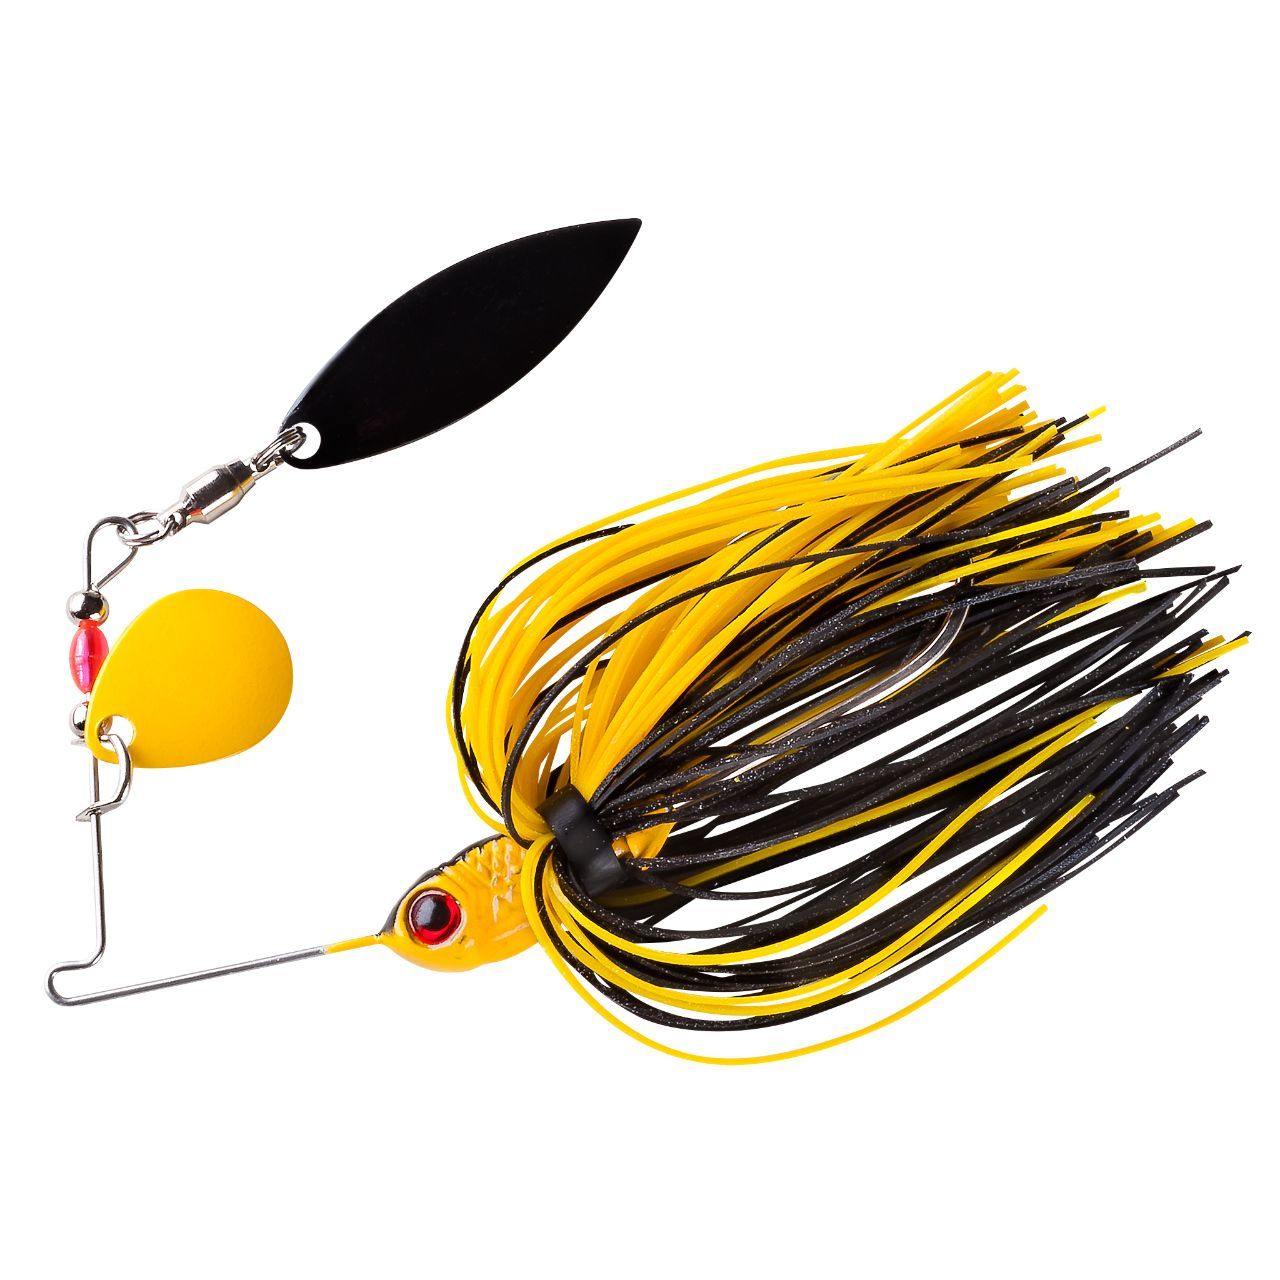 Spinner Baits,Rooster Tail Fishing Lures,Fishing Nepal